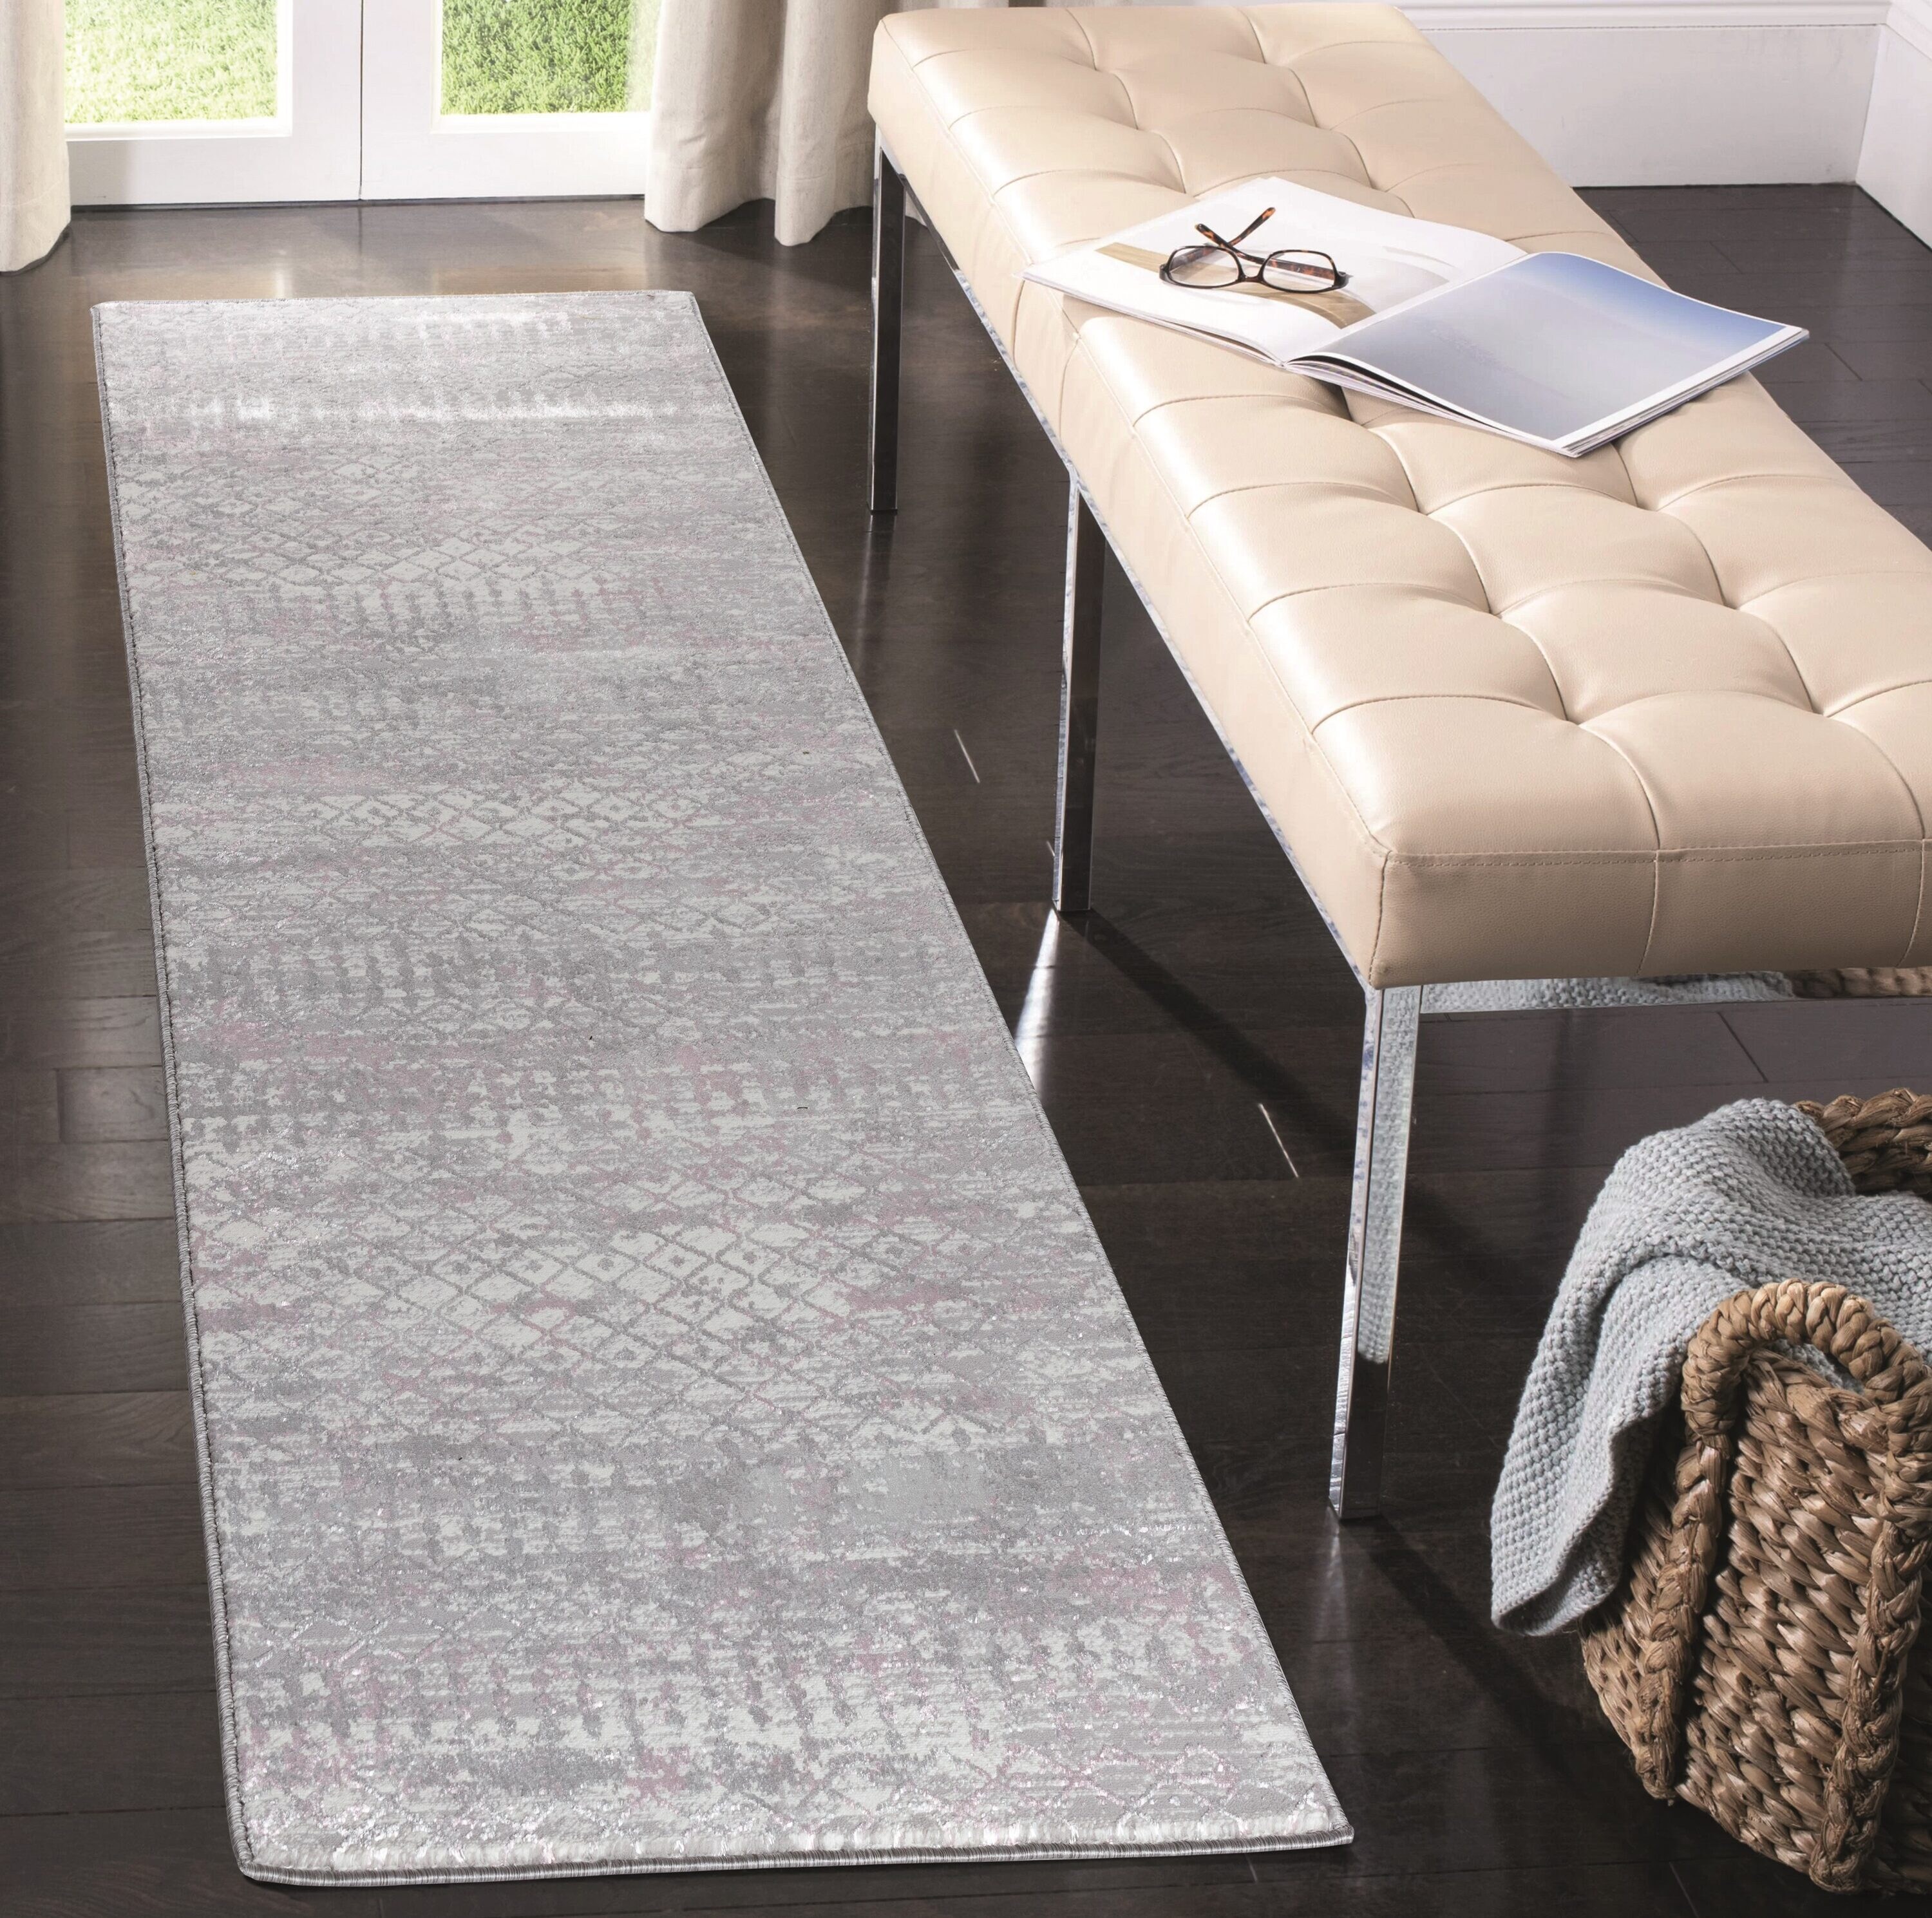 Maz Collection Abstract Geometric Gray and Rose Area Rug - 2' x 3